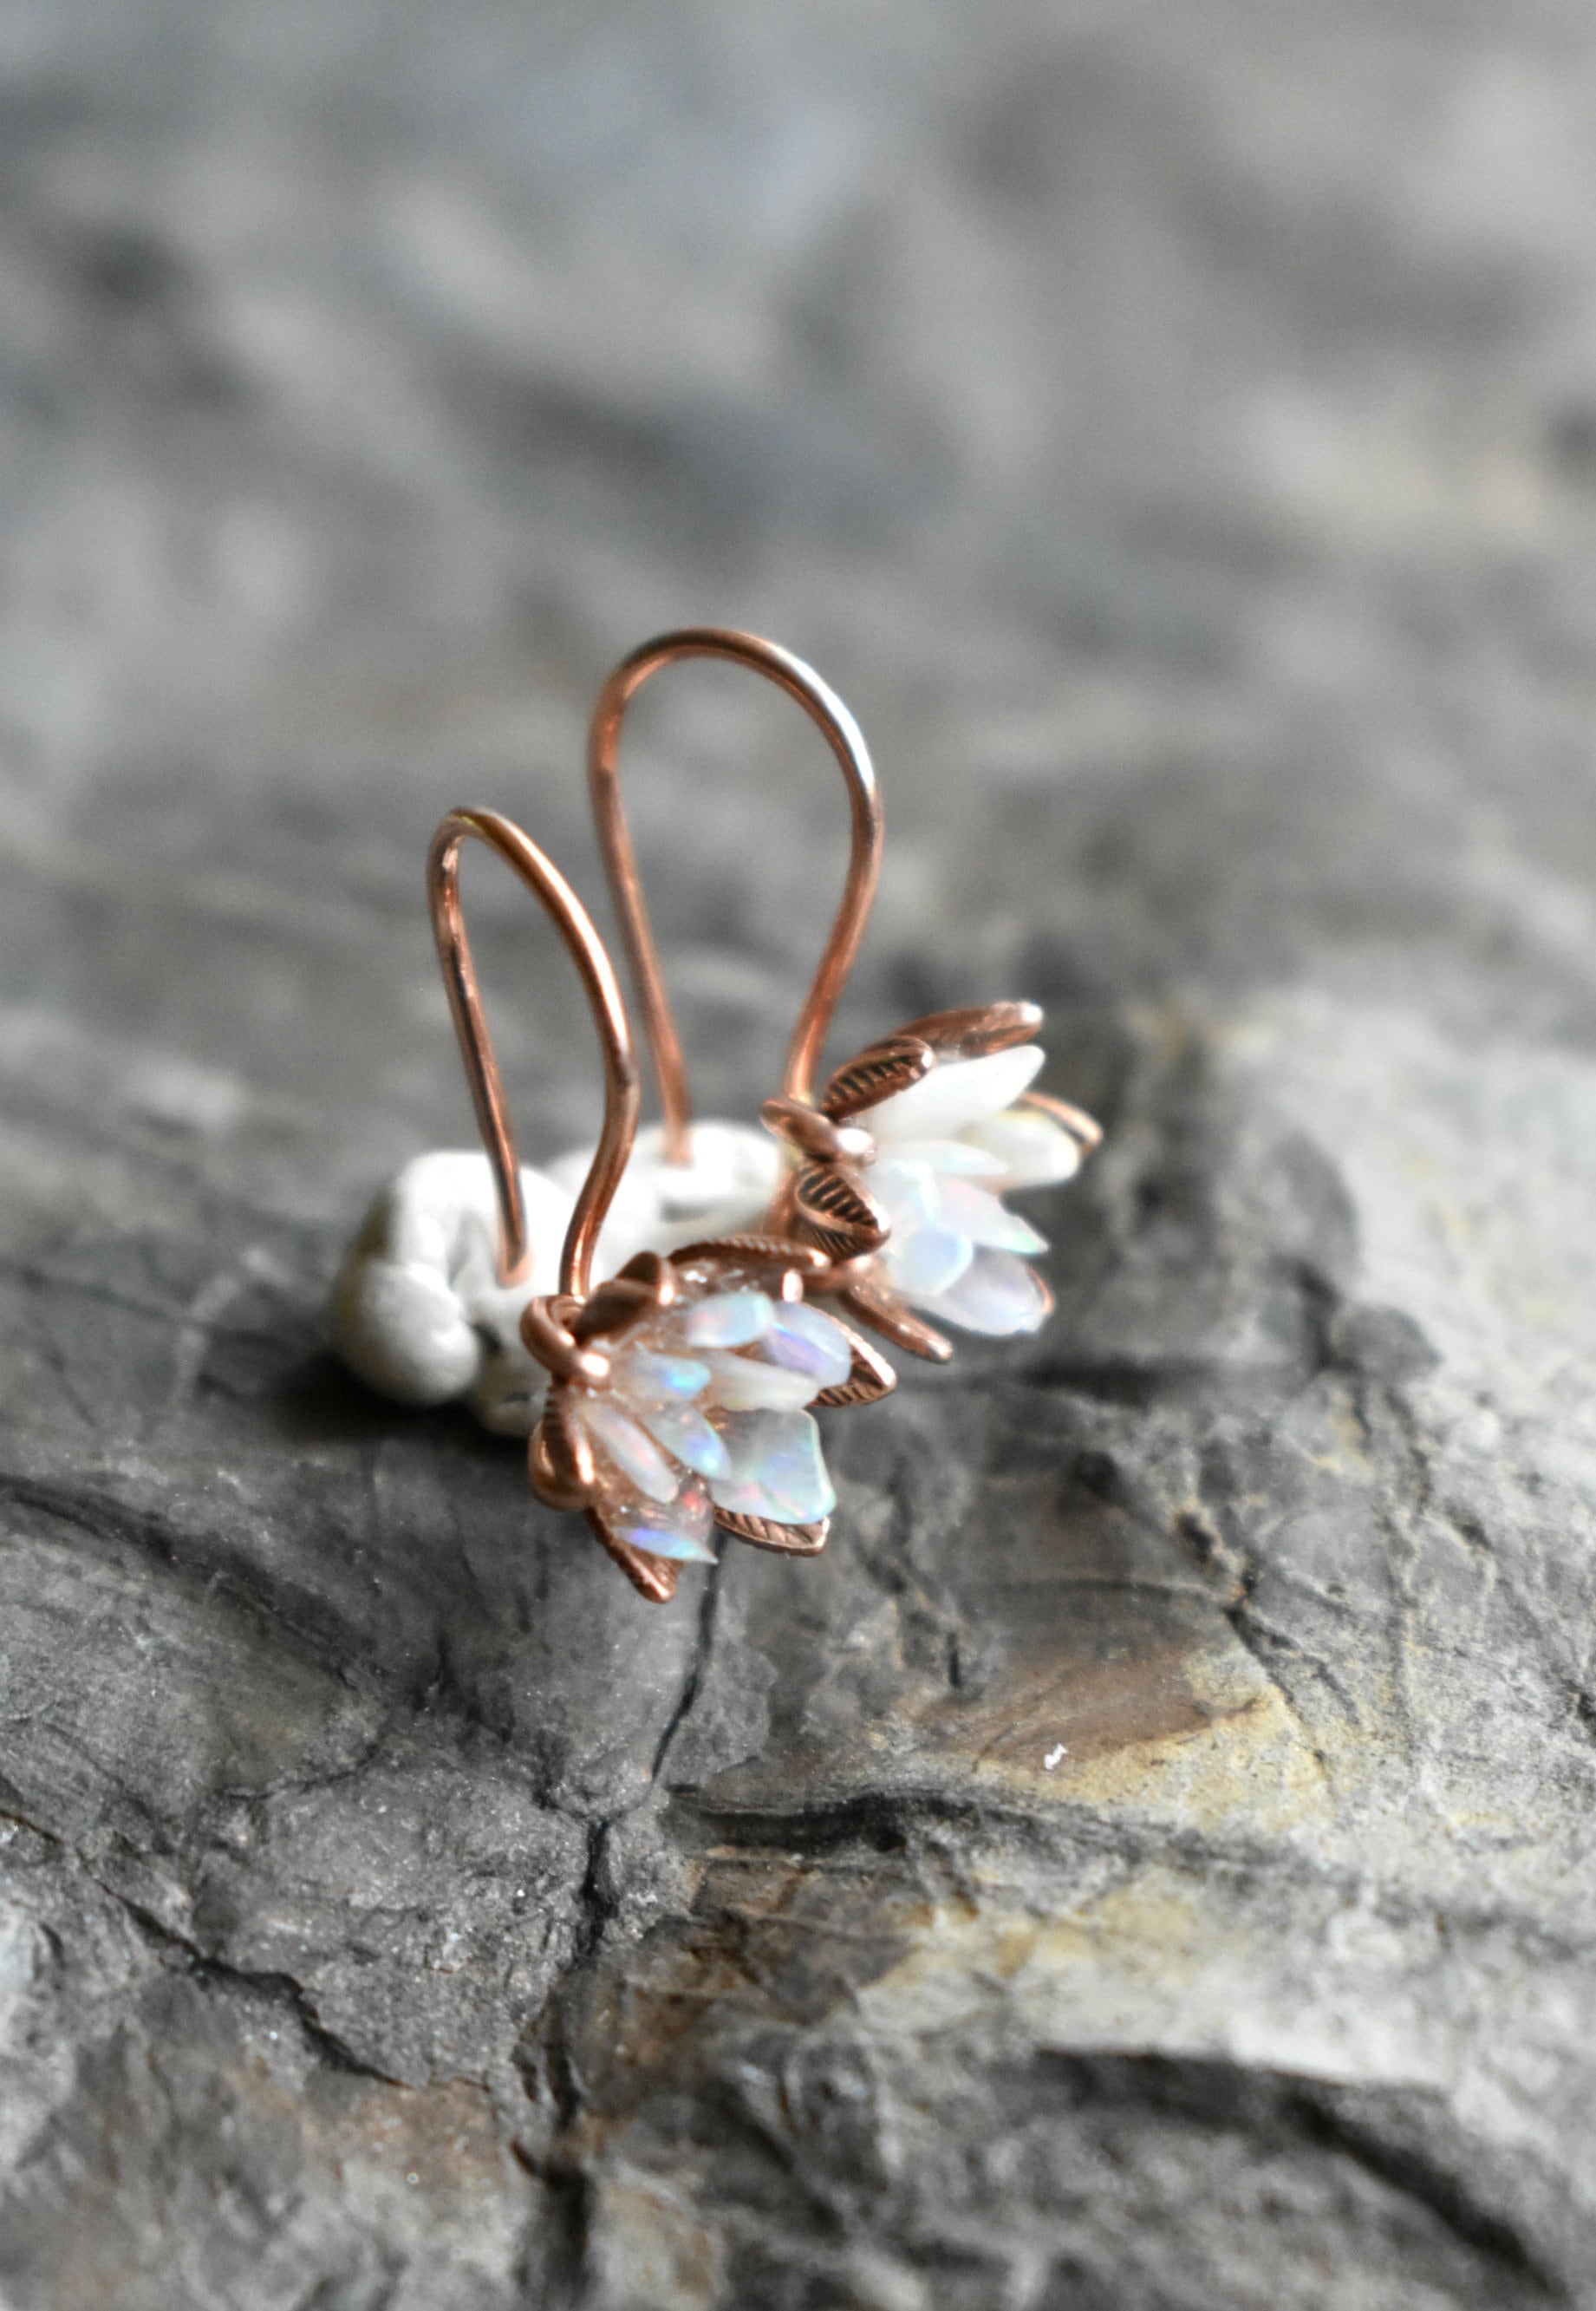 Raw Gemstone Lotus Earrings, Rough Natural Gemstones in 14K Rose Gold Fill French Ear Wire Dangles, Drop Dangle Earrings in Pink Gold Fill